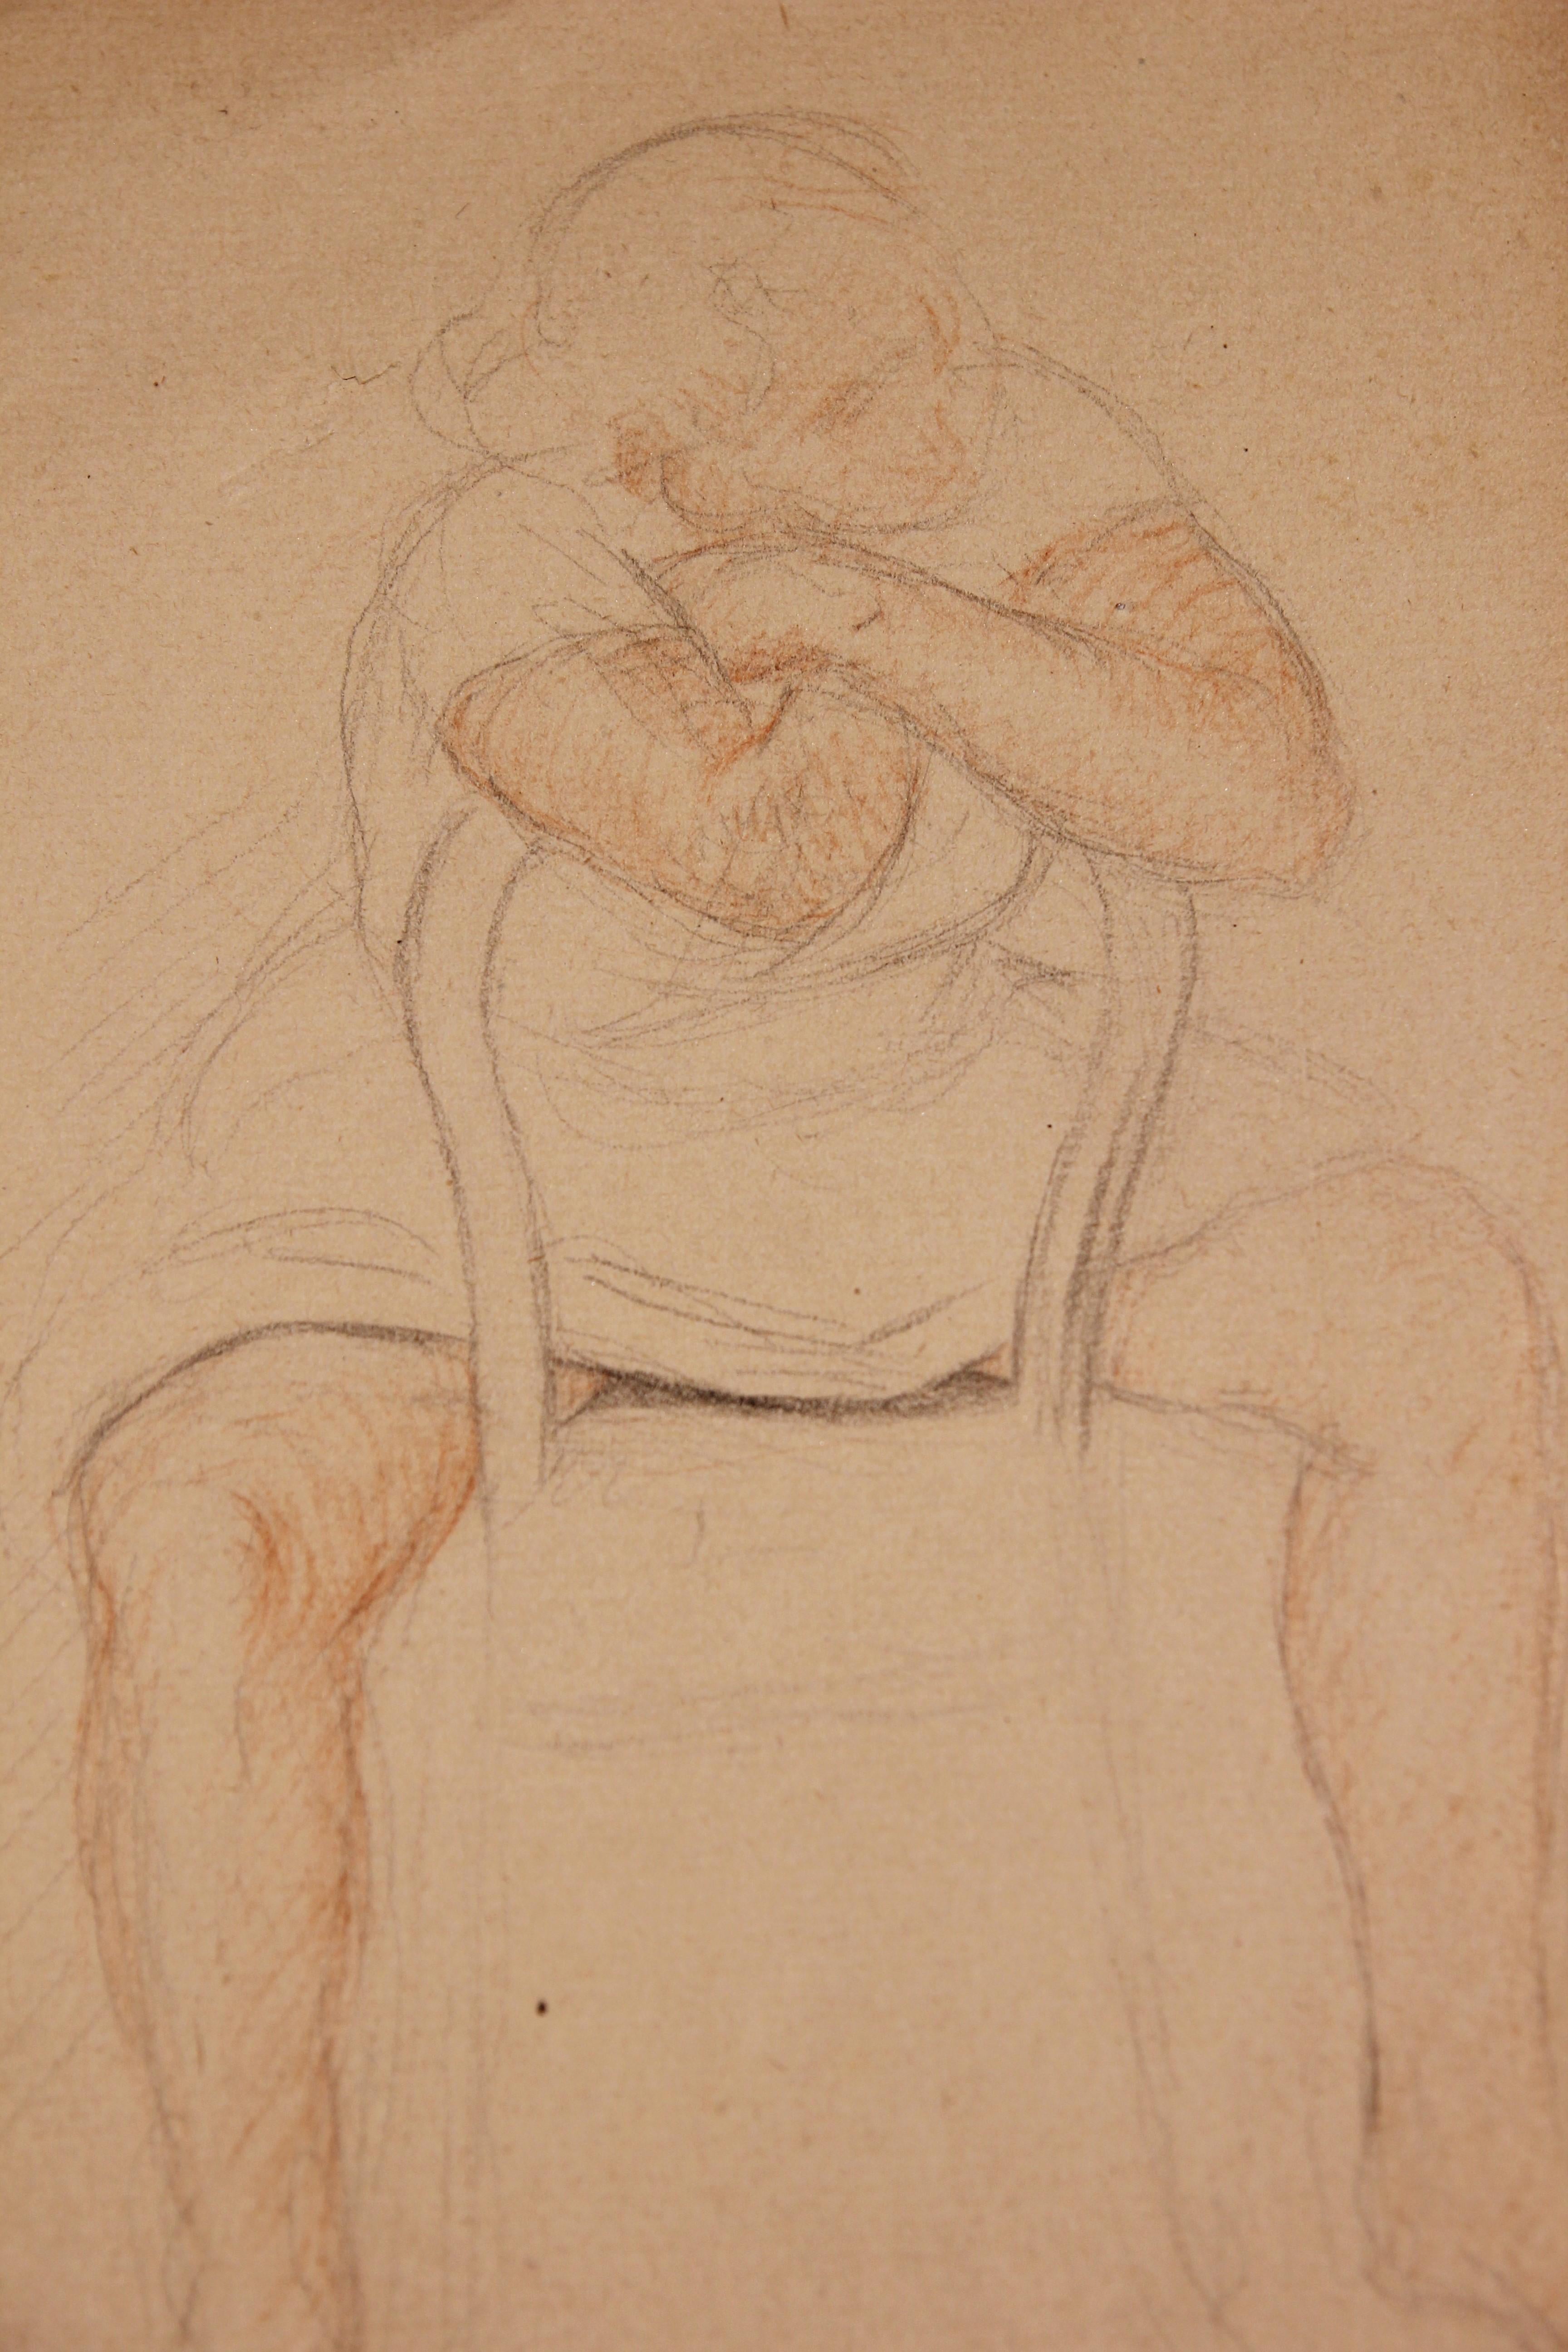 Study of a seated woman in a chair that is facing backward. The drawing is stamped by the artist. The paper is not framed.

Many others are available. Please inquire to buy the entire collection.

Artist Biography: Emile Lejeune was a painter form